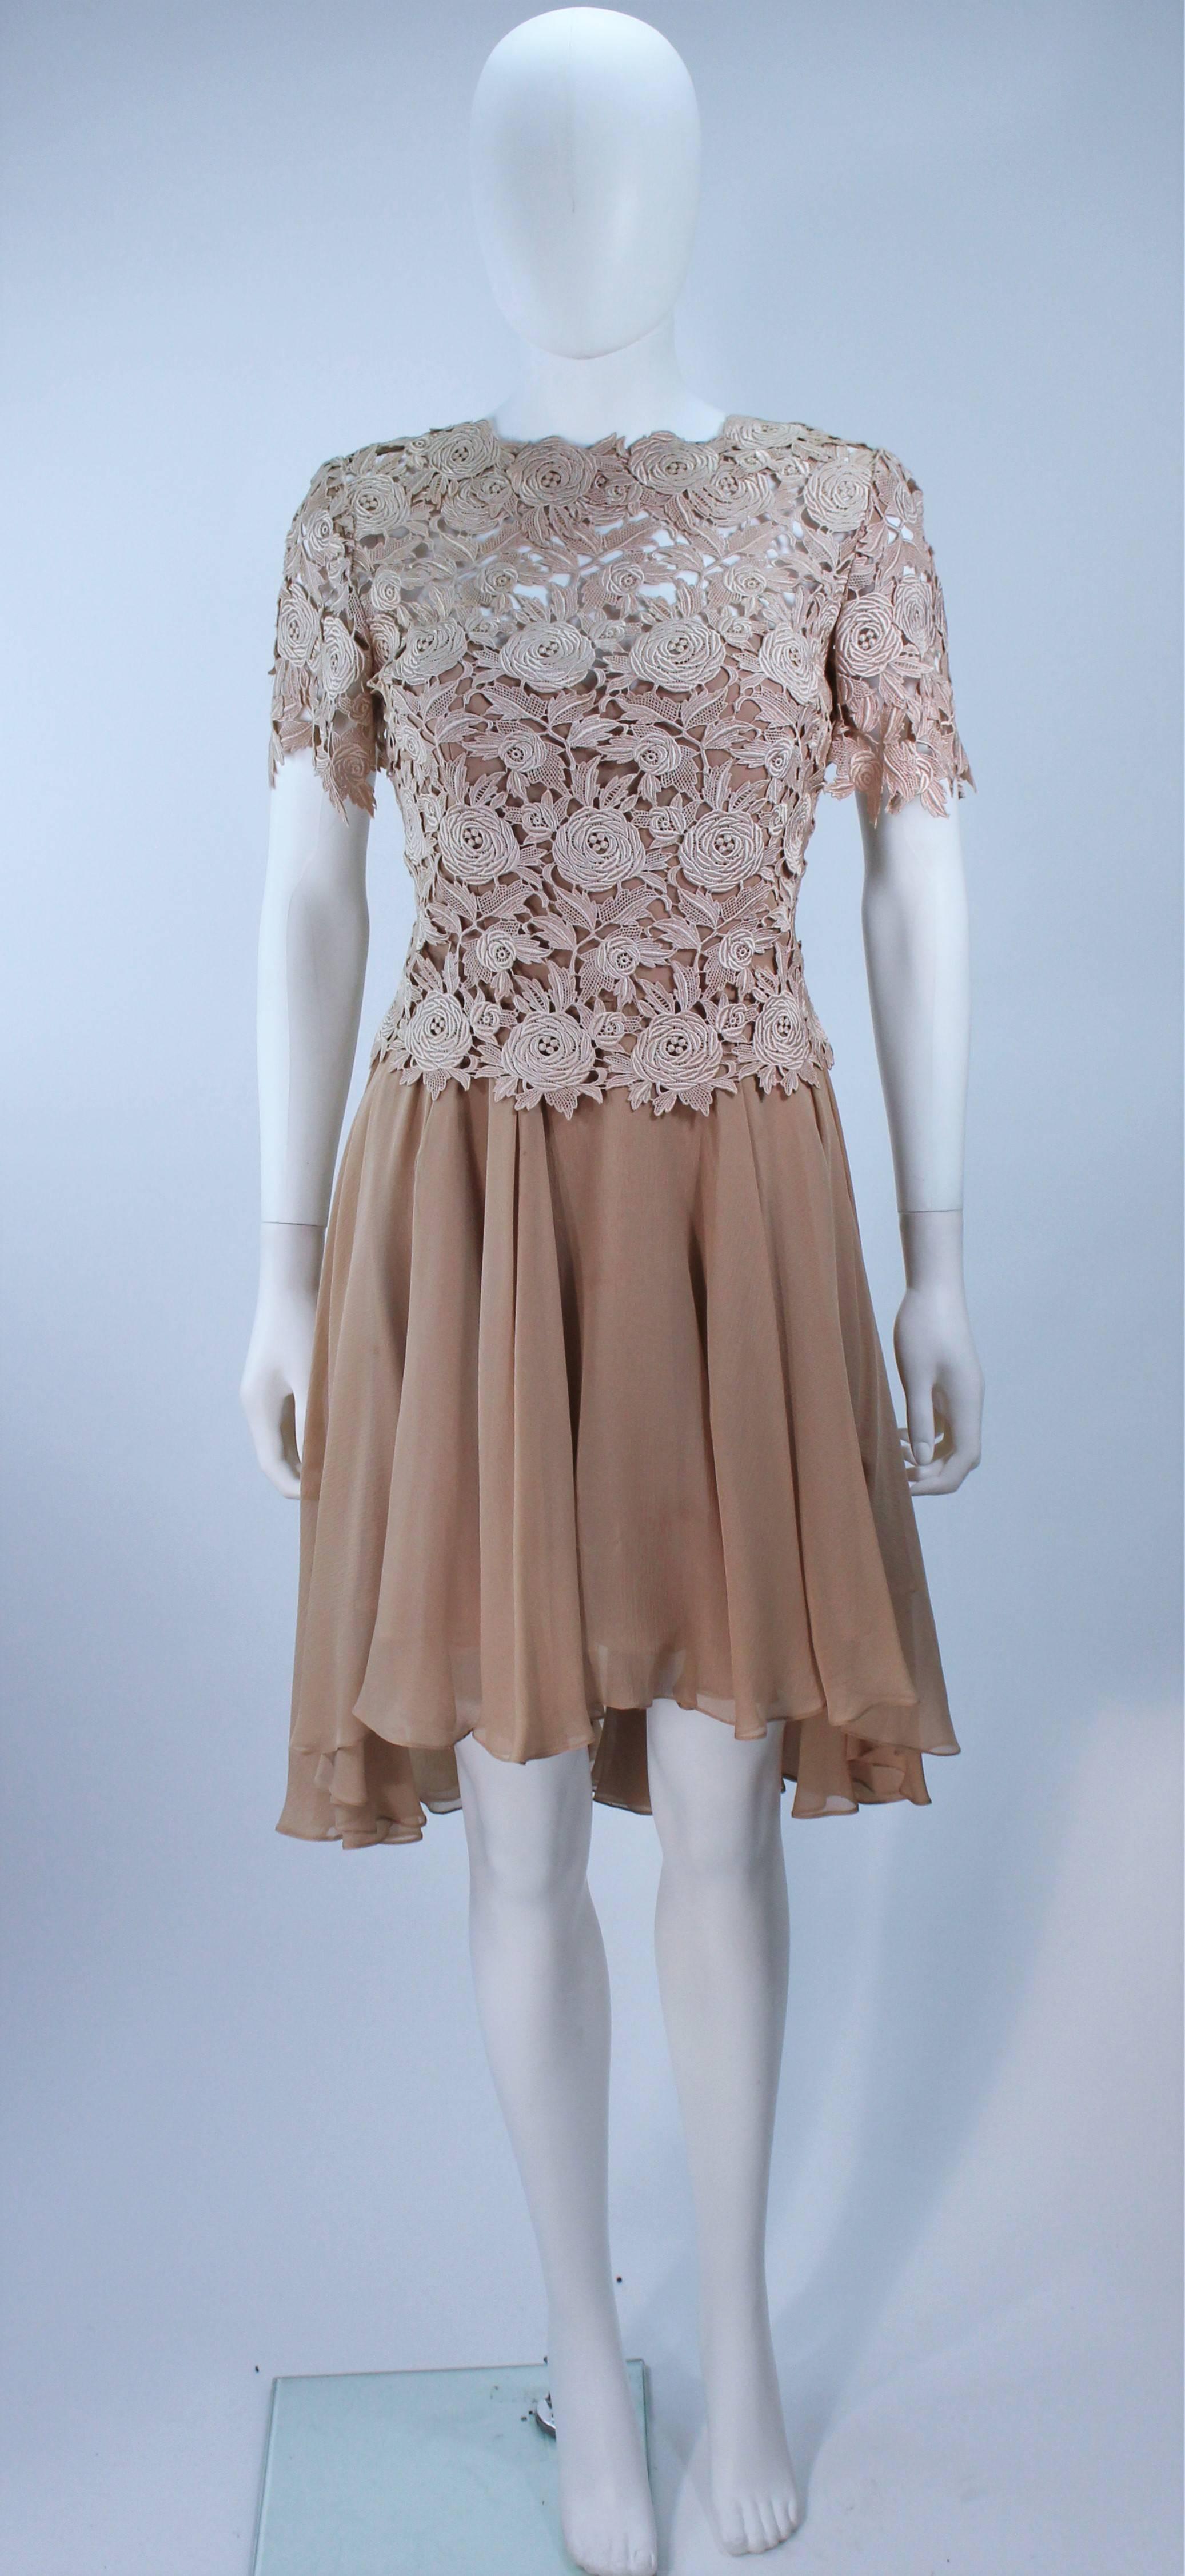 This Travilla  dress is composed of a nude floral lace and chiffon combination, with scalloped edge. There is a center back zipper closure. In excellent vintage condition.

  **Please cross-reference measurements for personal accuracy.